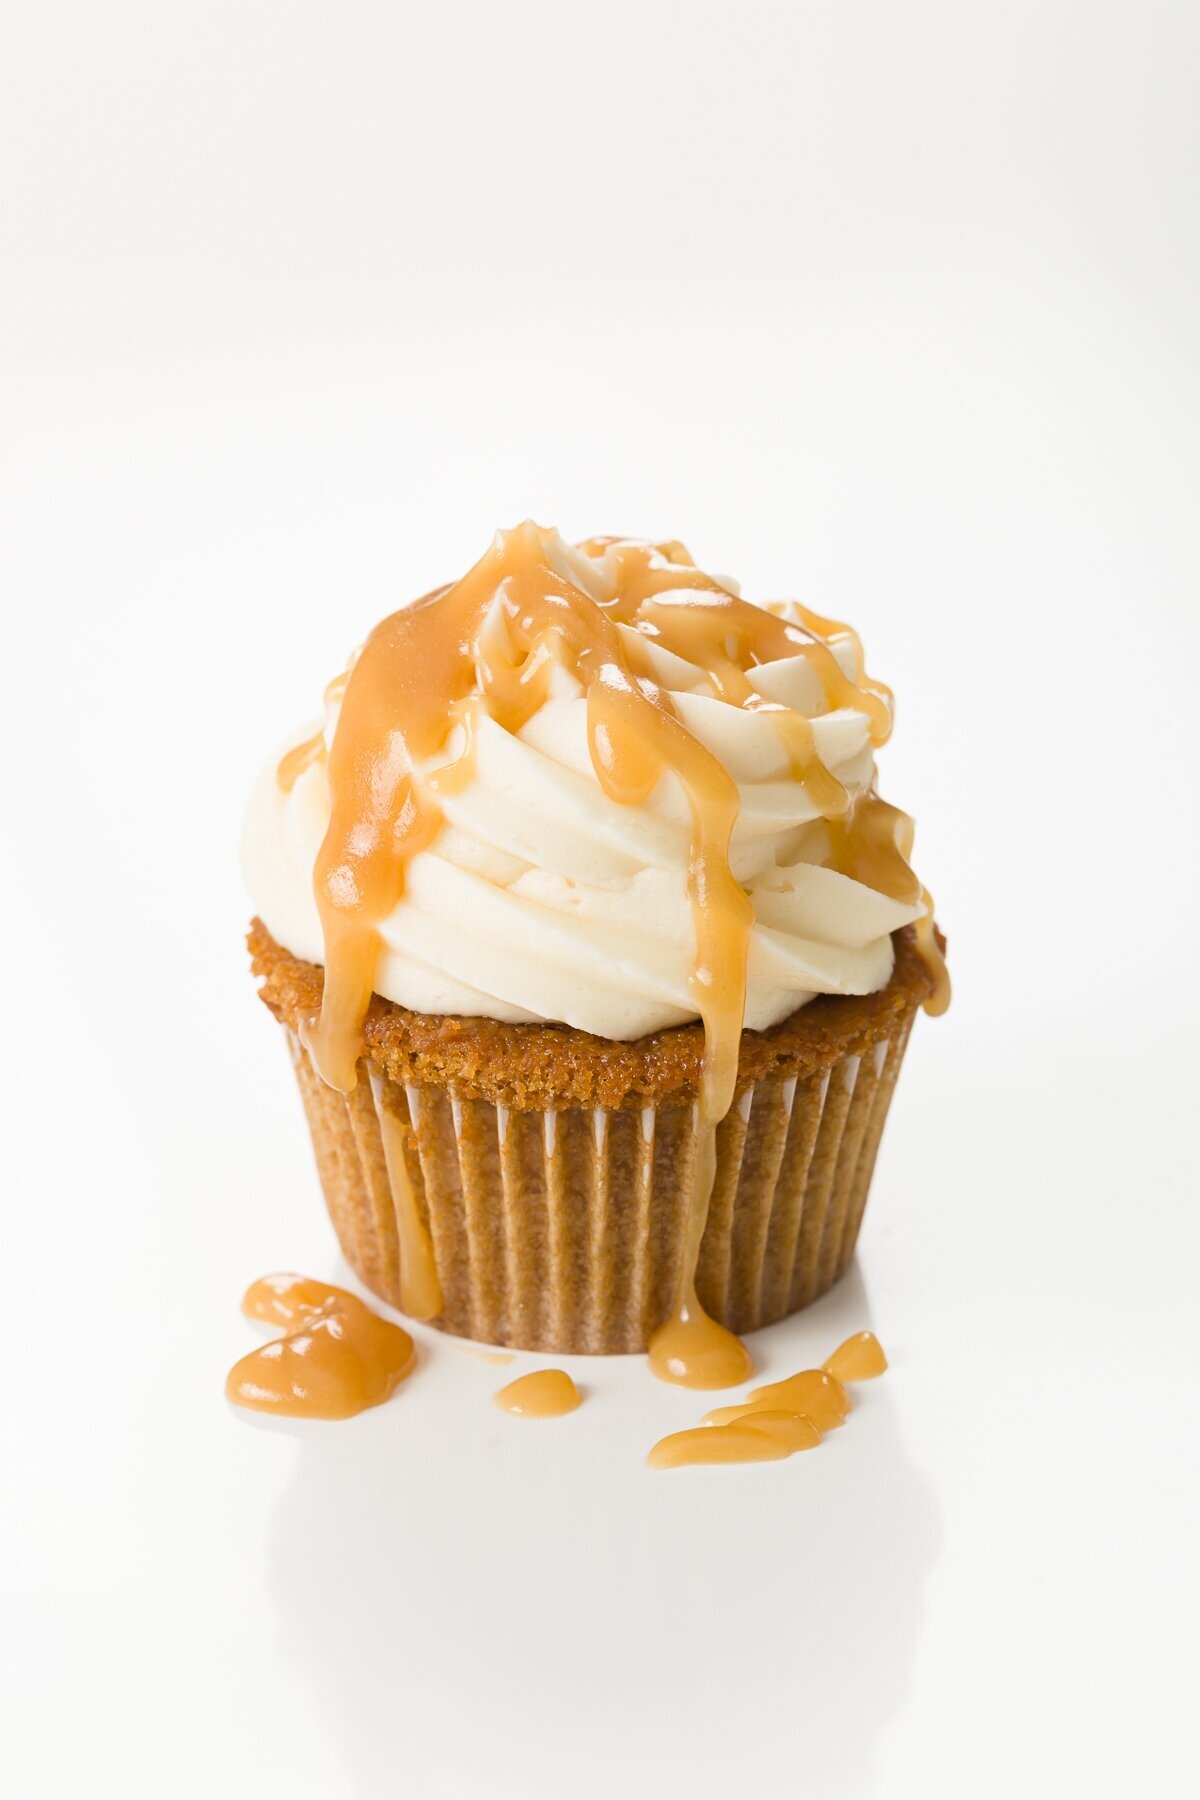 Gallery image for https://www.cupcakeproject.com/butterscotch-cupcakes/